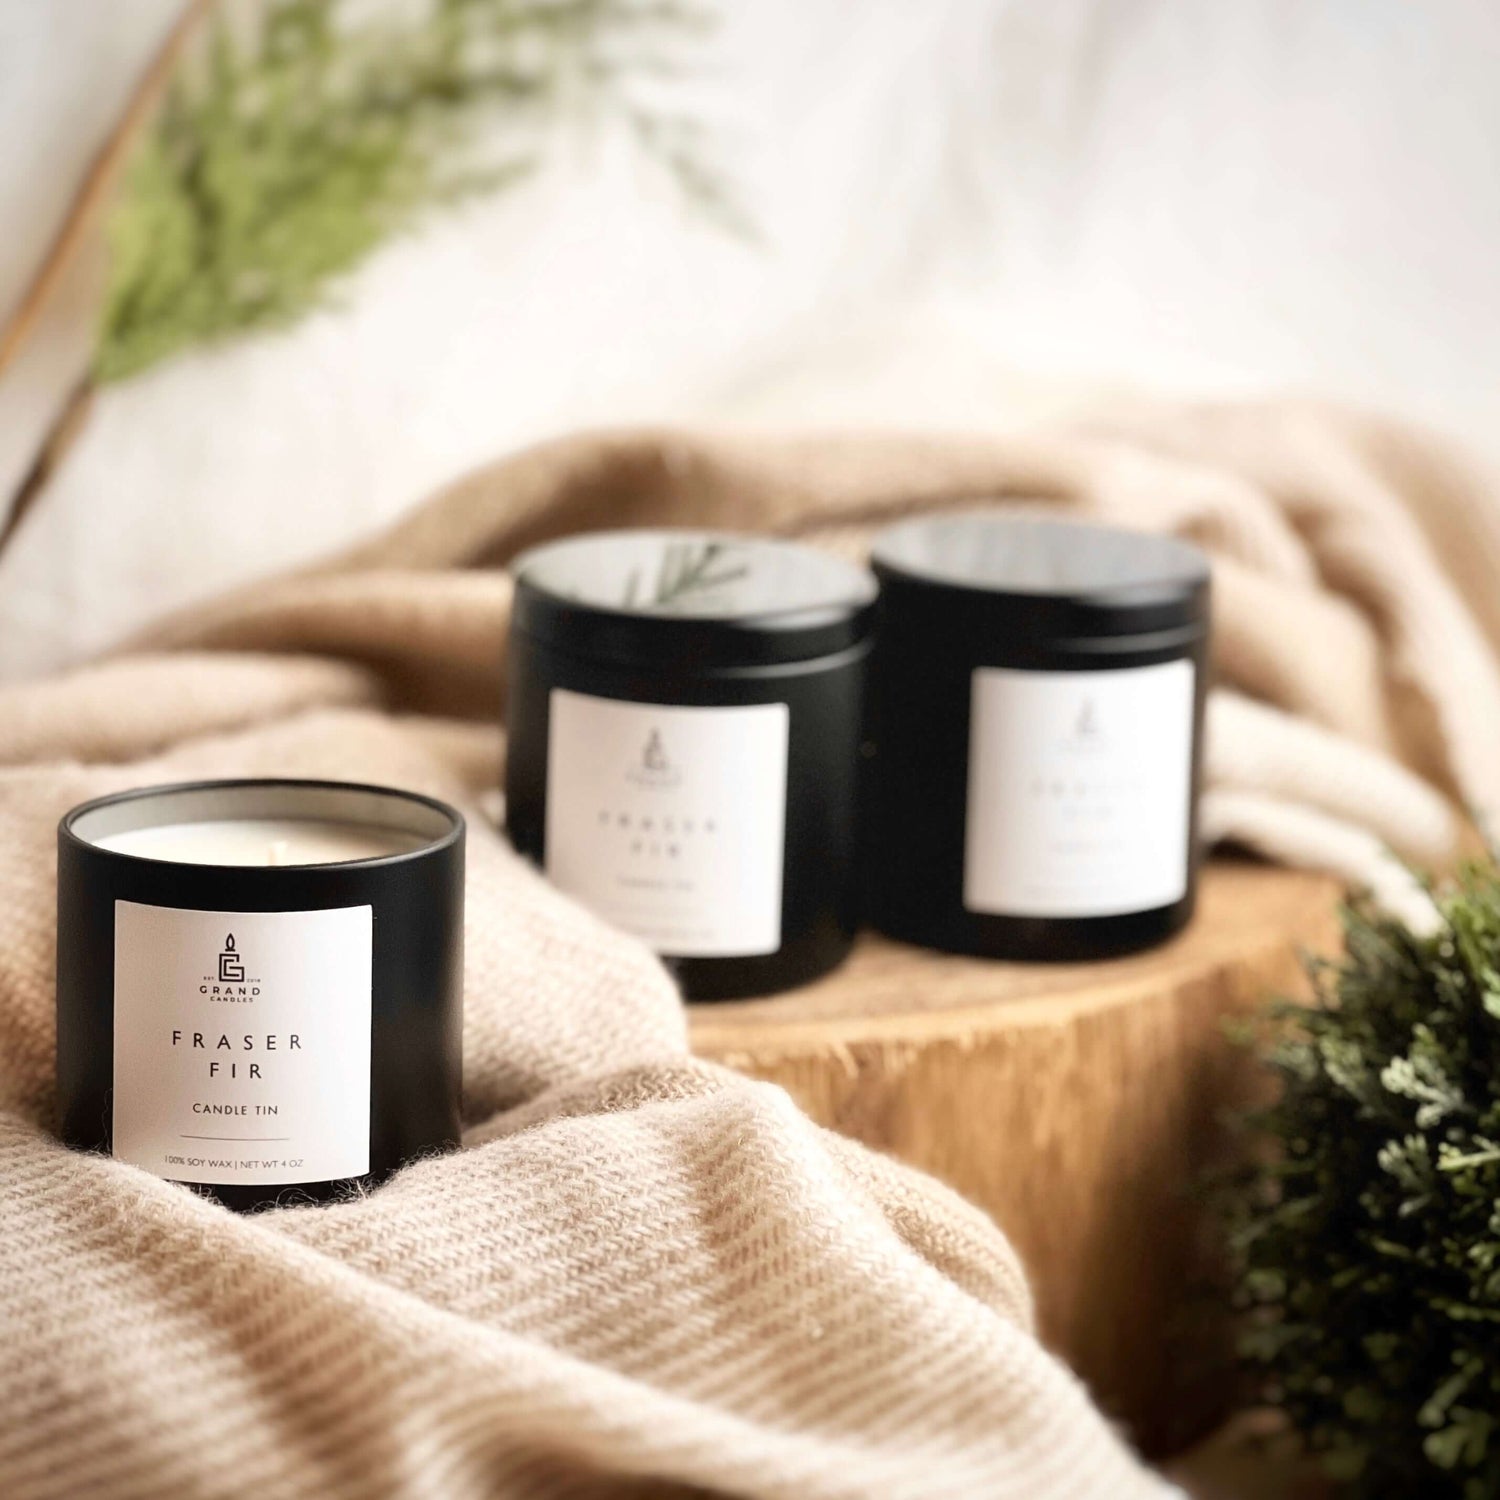 Pine Scented Candle - Soy Candle - Fraser Fir Candle